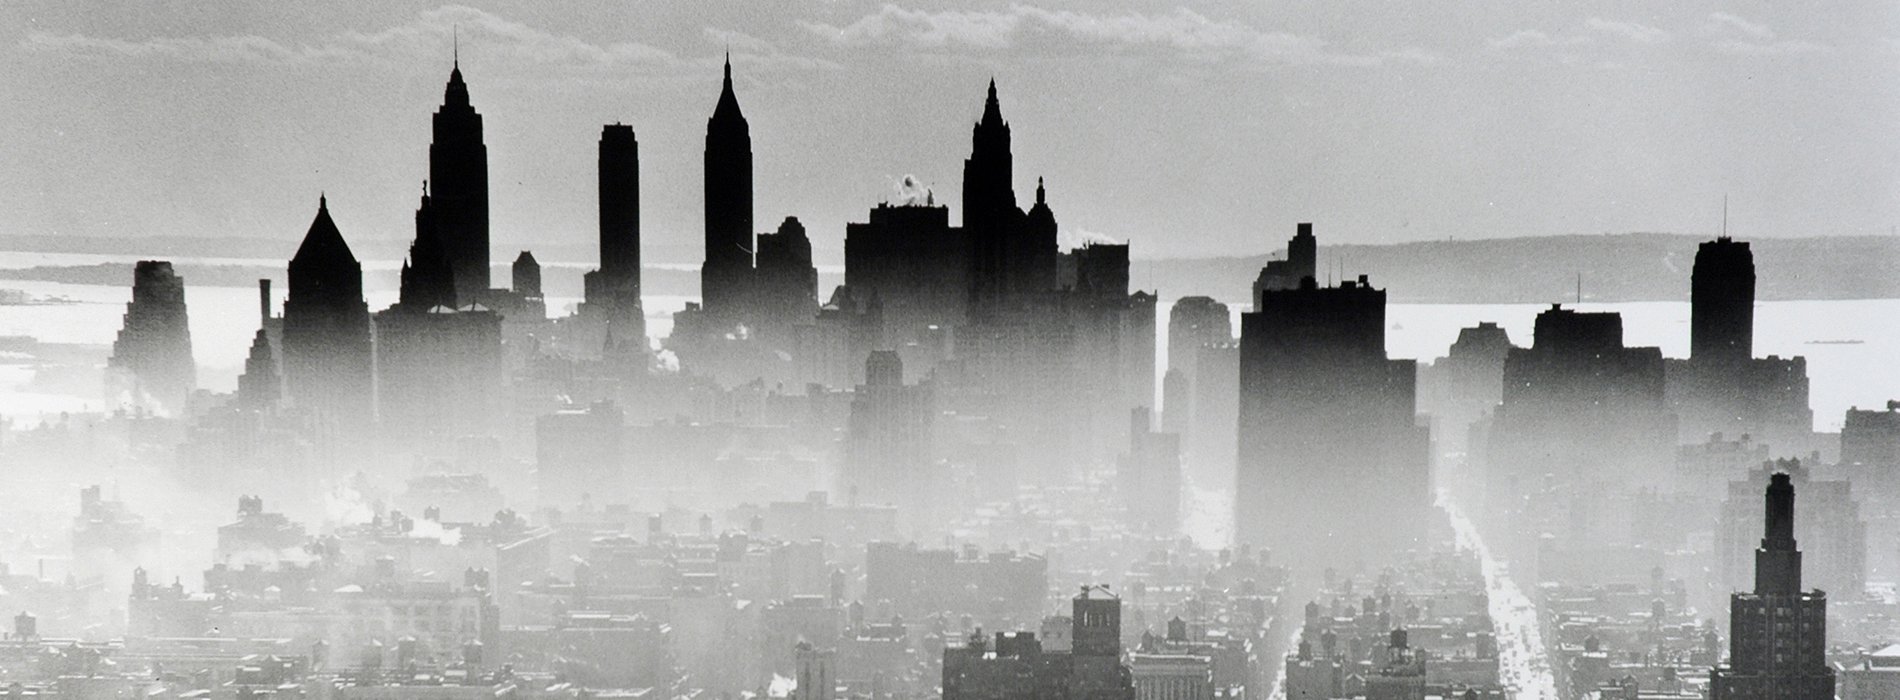 Black and white cityscape of the New York skyline with fog in the foreground.